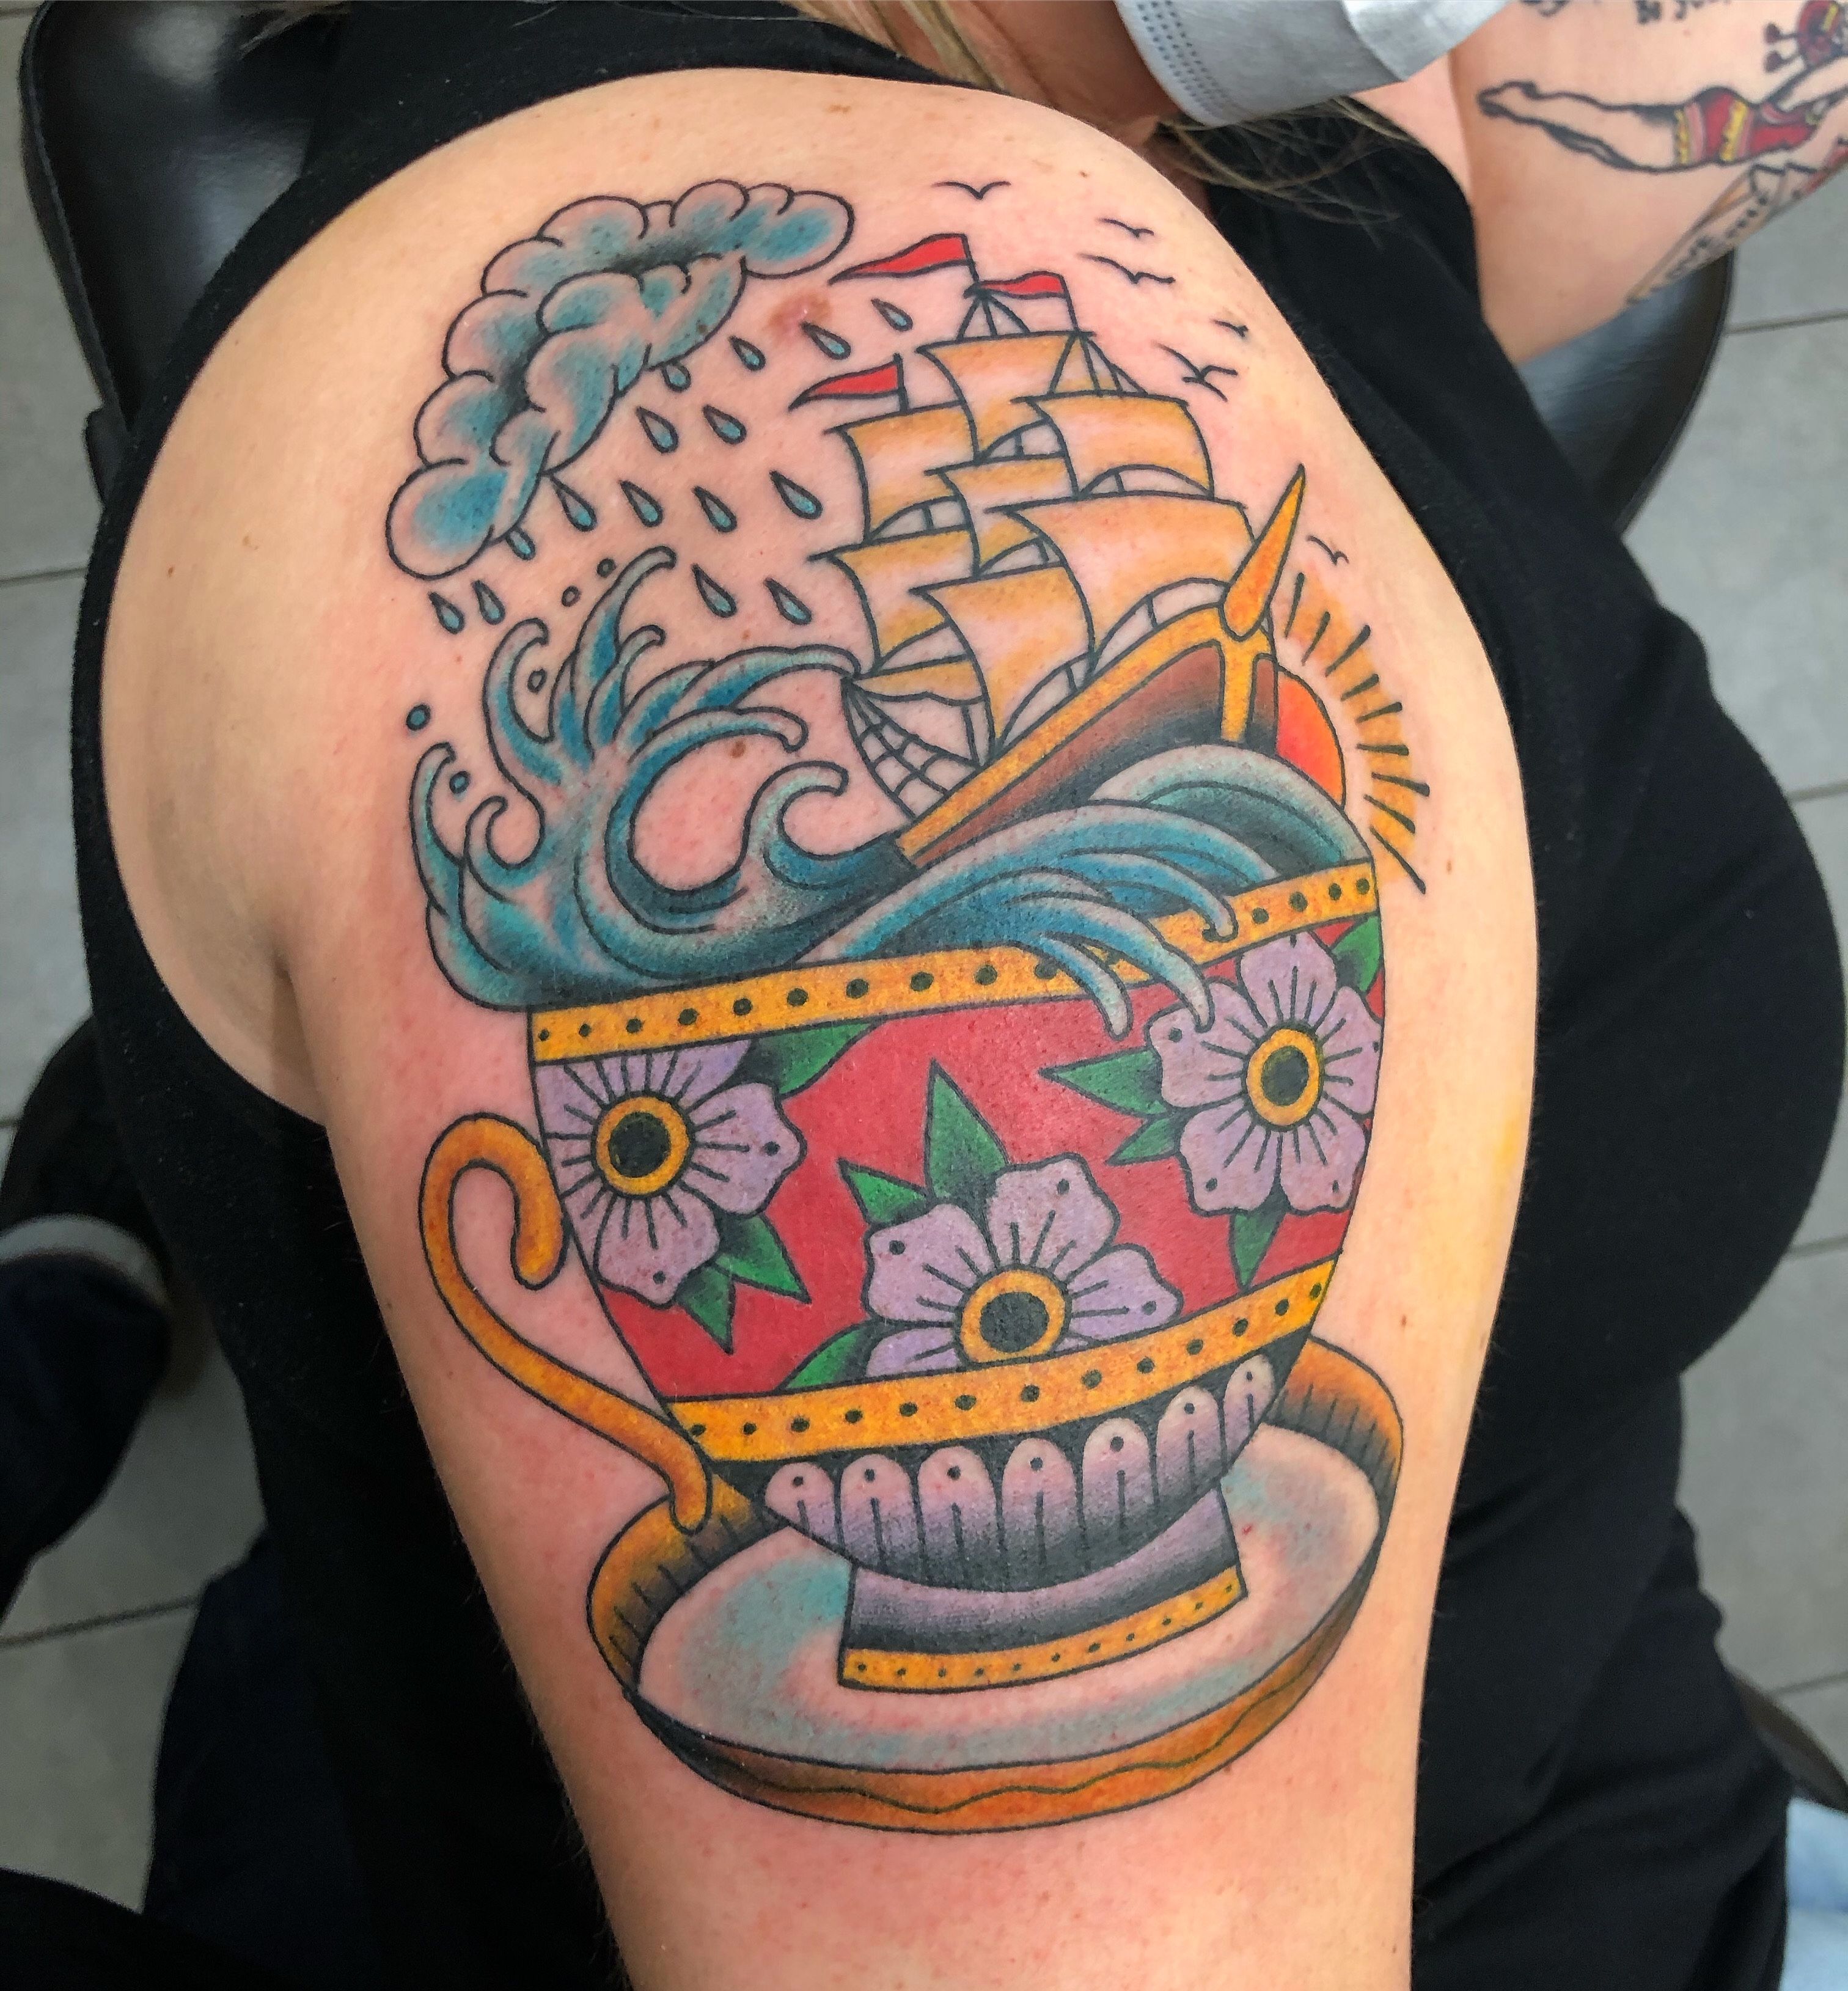 Teacup - Tattoo Abyss Montreal